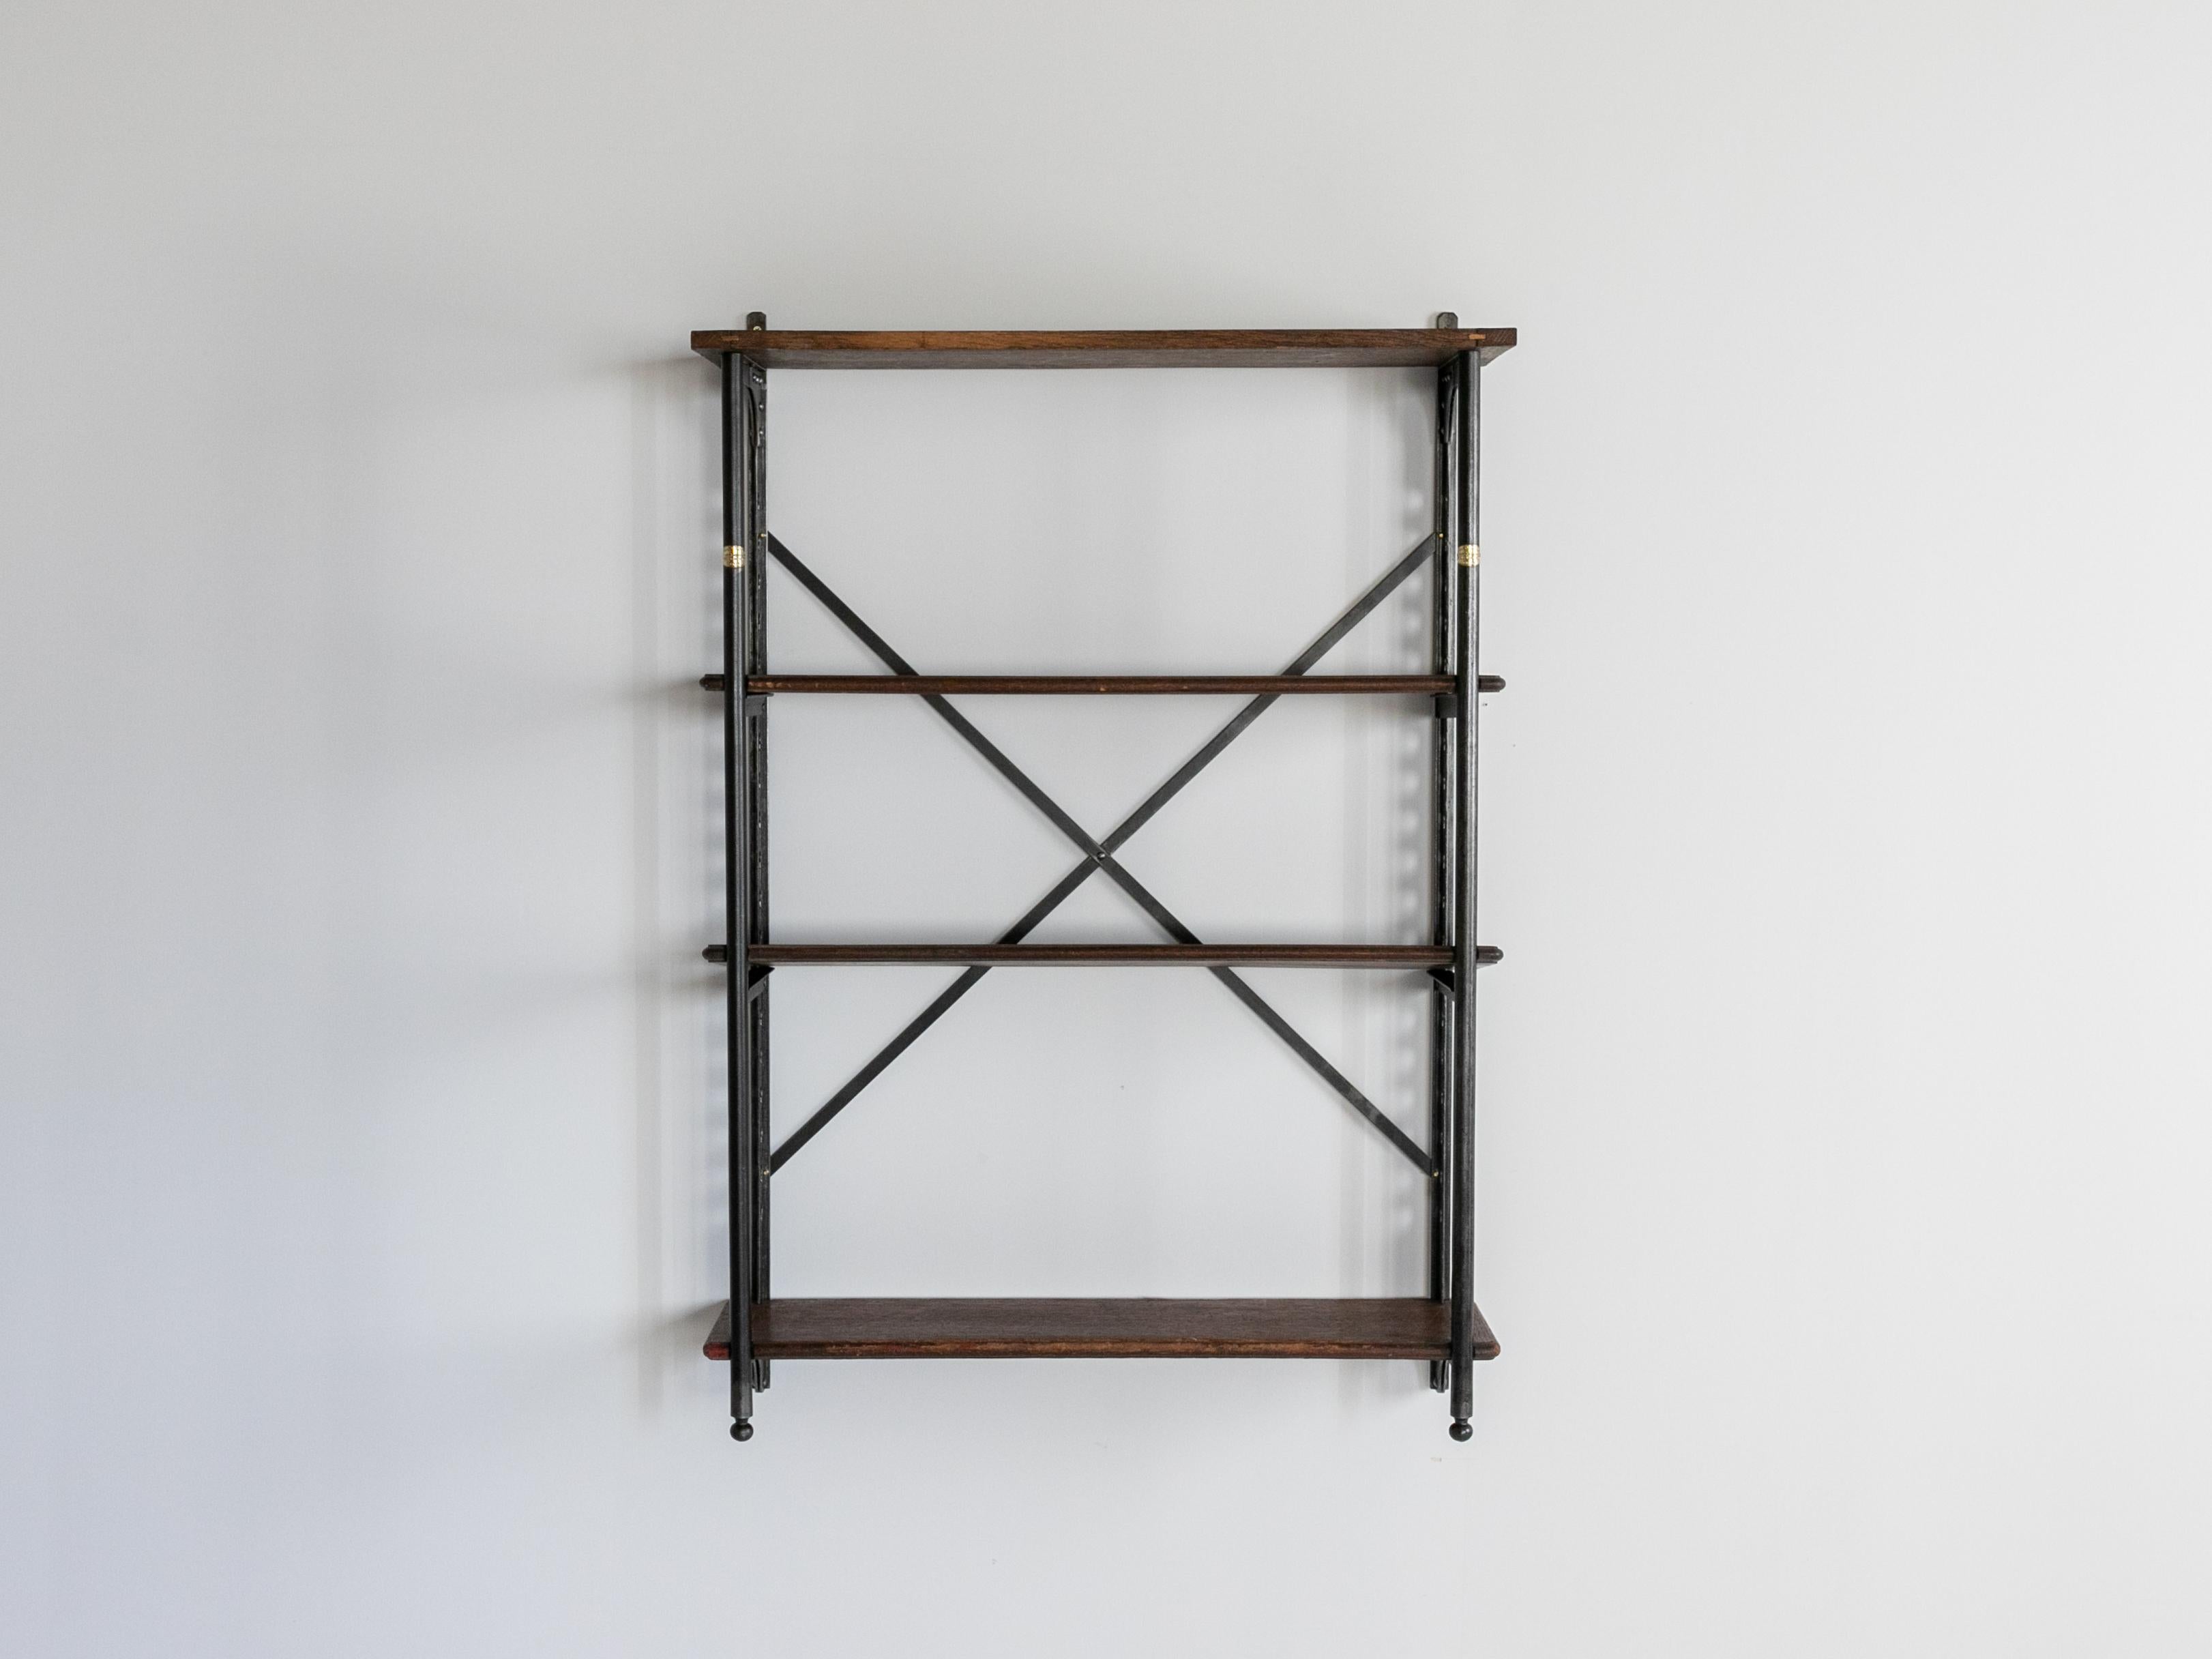 Theodore Scherf France circa 1900 stamped with makers mark

Industrial shelf manufactured by Theodore Scherf.
Originally used in a textile factory, the shelves are movable.
It can be used as a wall hanging, but can also be placed on the floor as